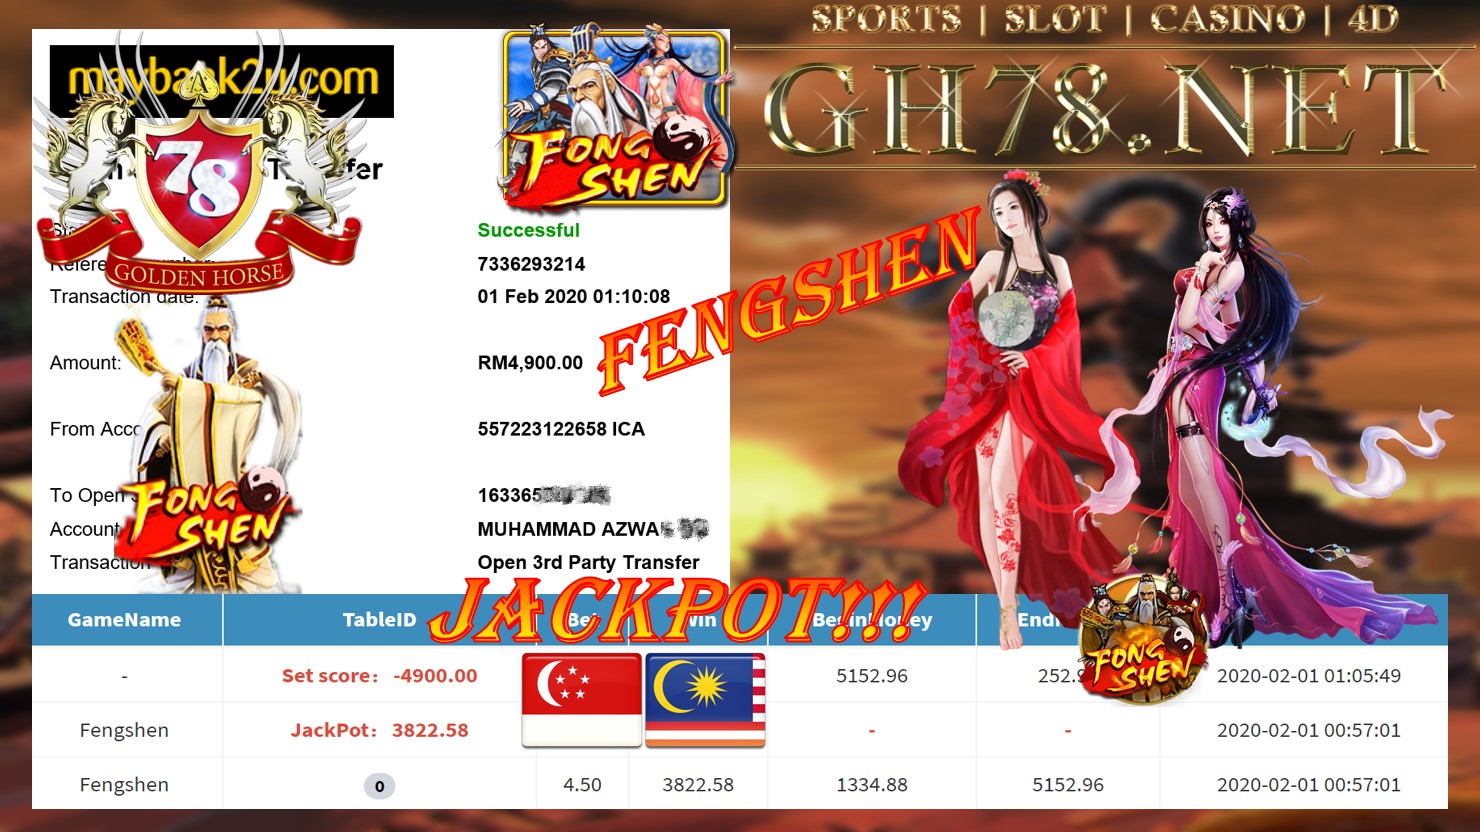 2020 NEW YEAR !!! MEMBER MAIN PUSSY888 , FENGSHEN , WITHDRAW RM4900 !!!	